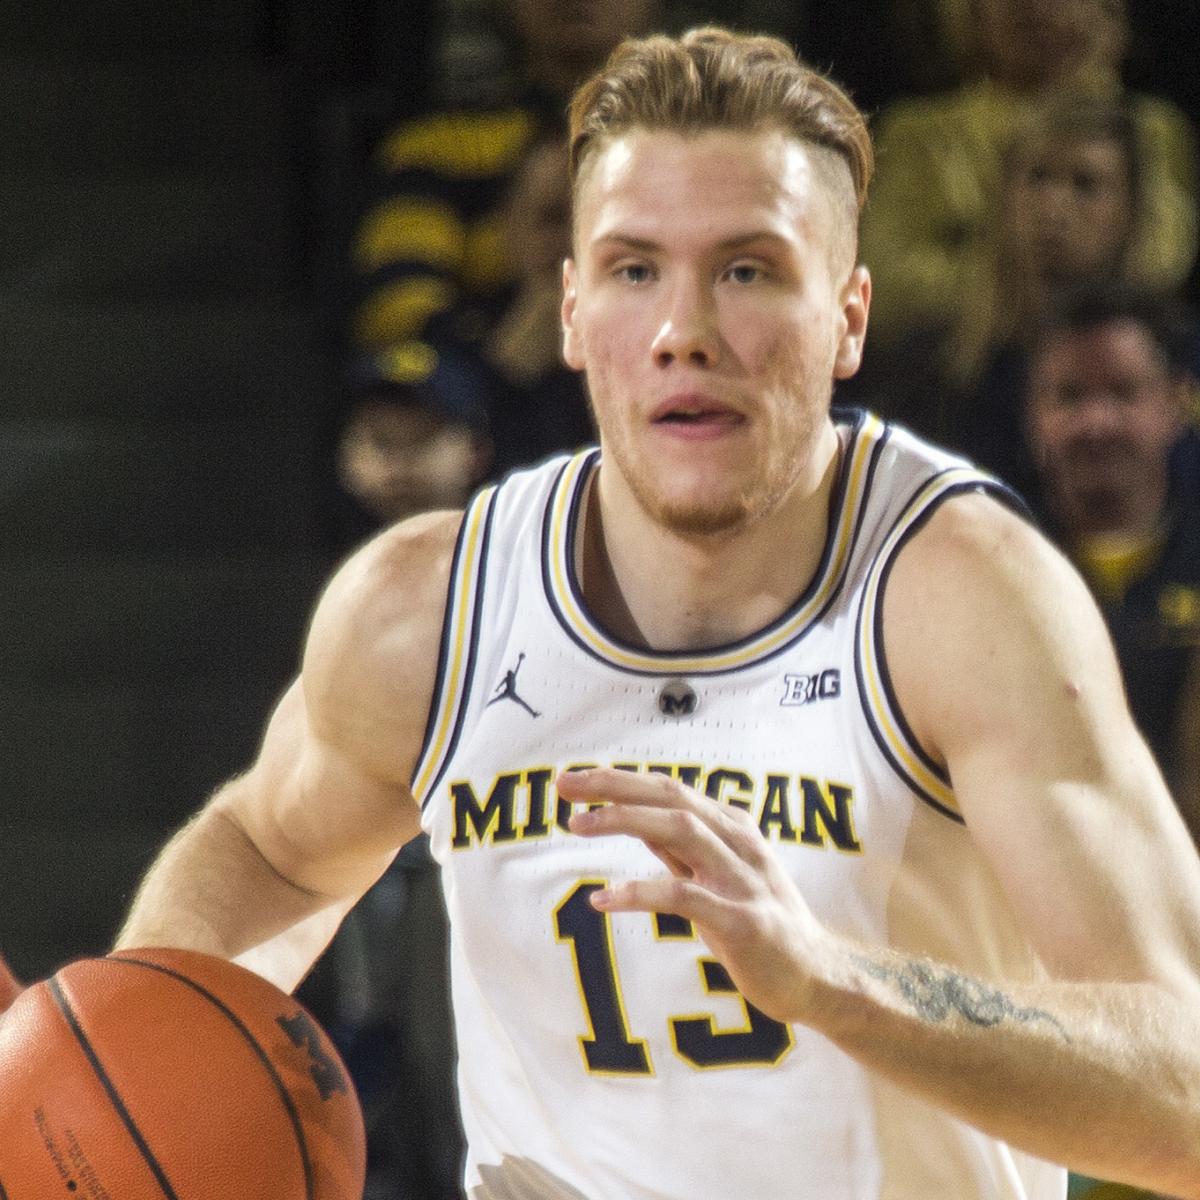 Michigan Stays Undefeated With 84 67 Win Over Unc Ignas Brazdeikis Scores 24 Bleacher Report Latest News Videos And Highlights